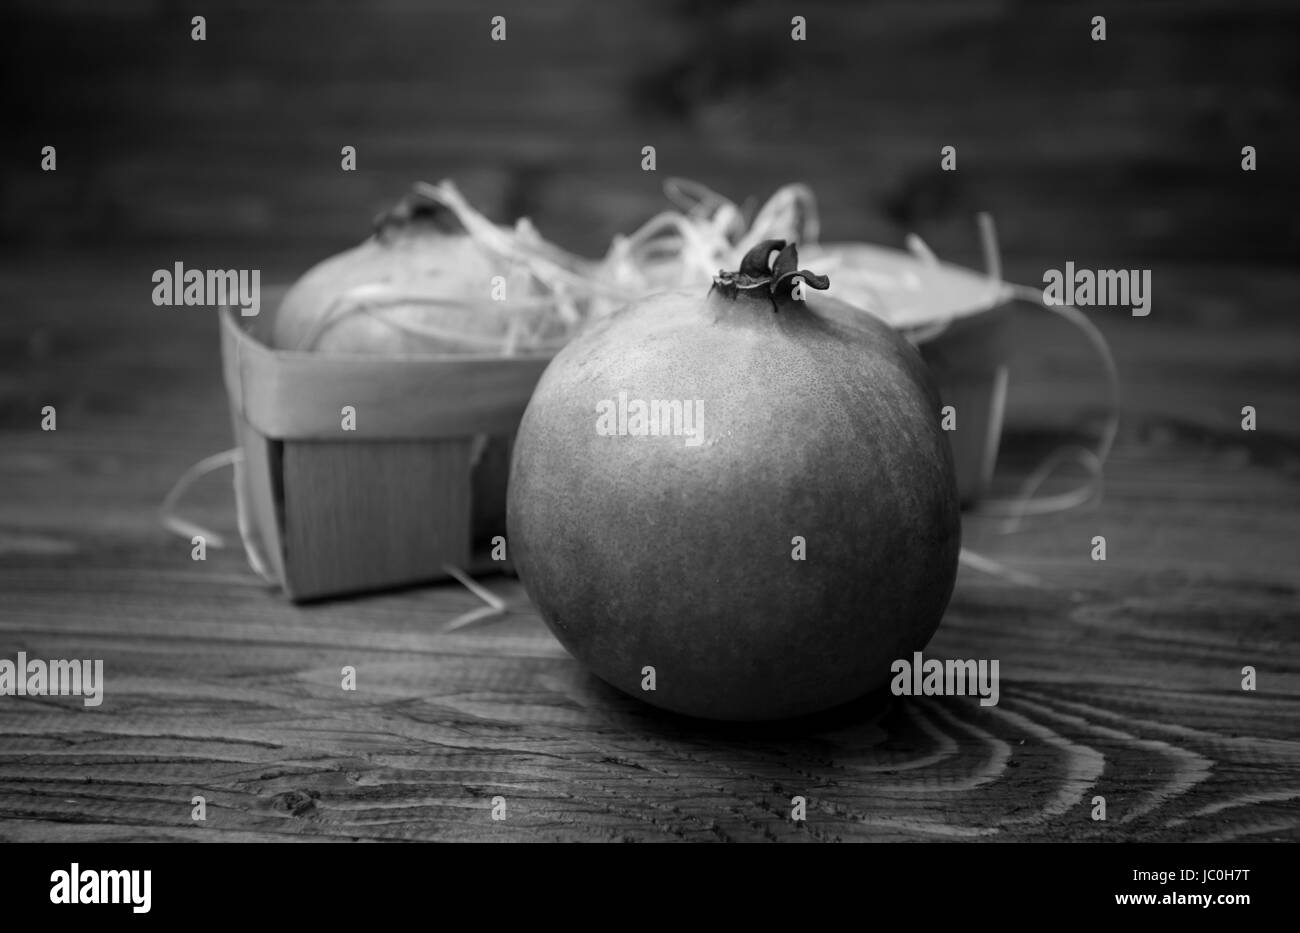 Closeup black and white photo of whole pomegranate lying on old wooden desk Stock Photo